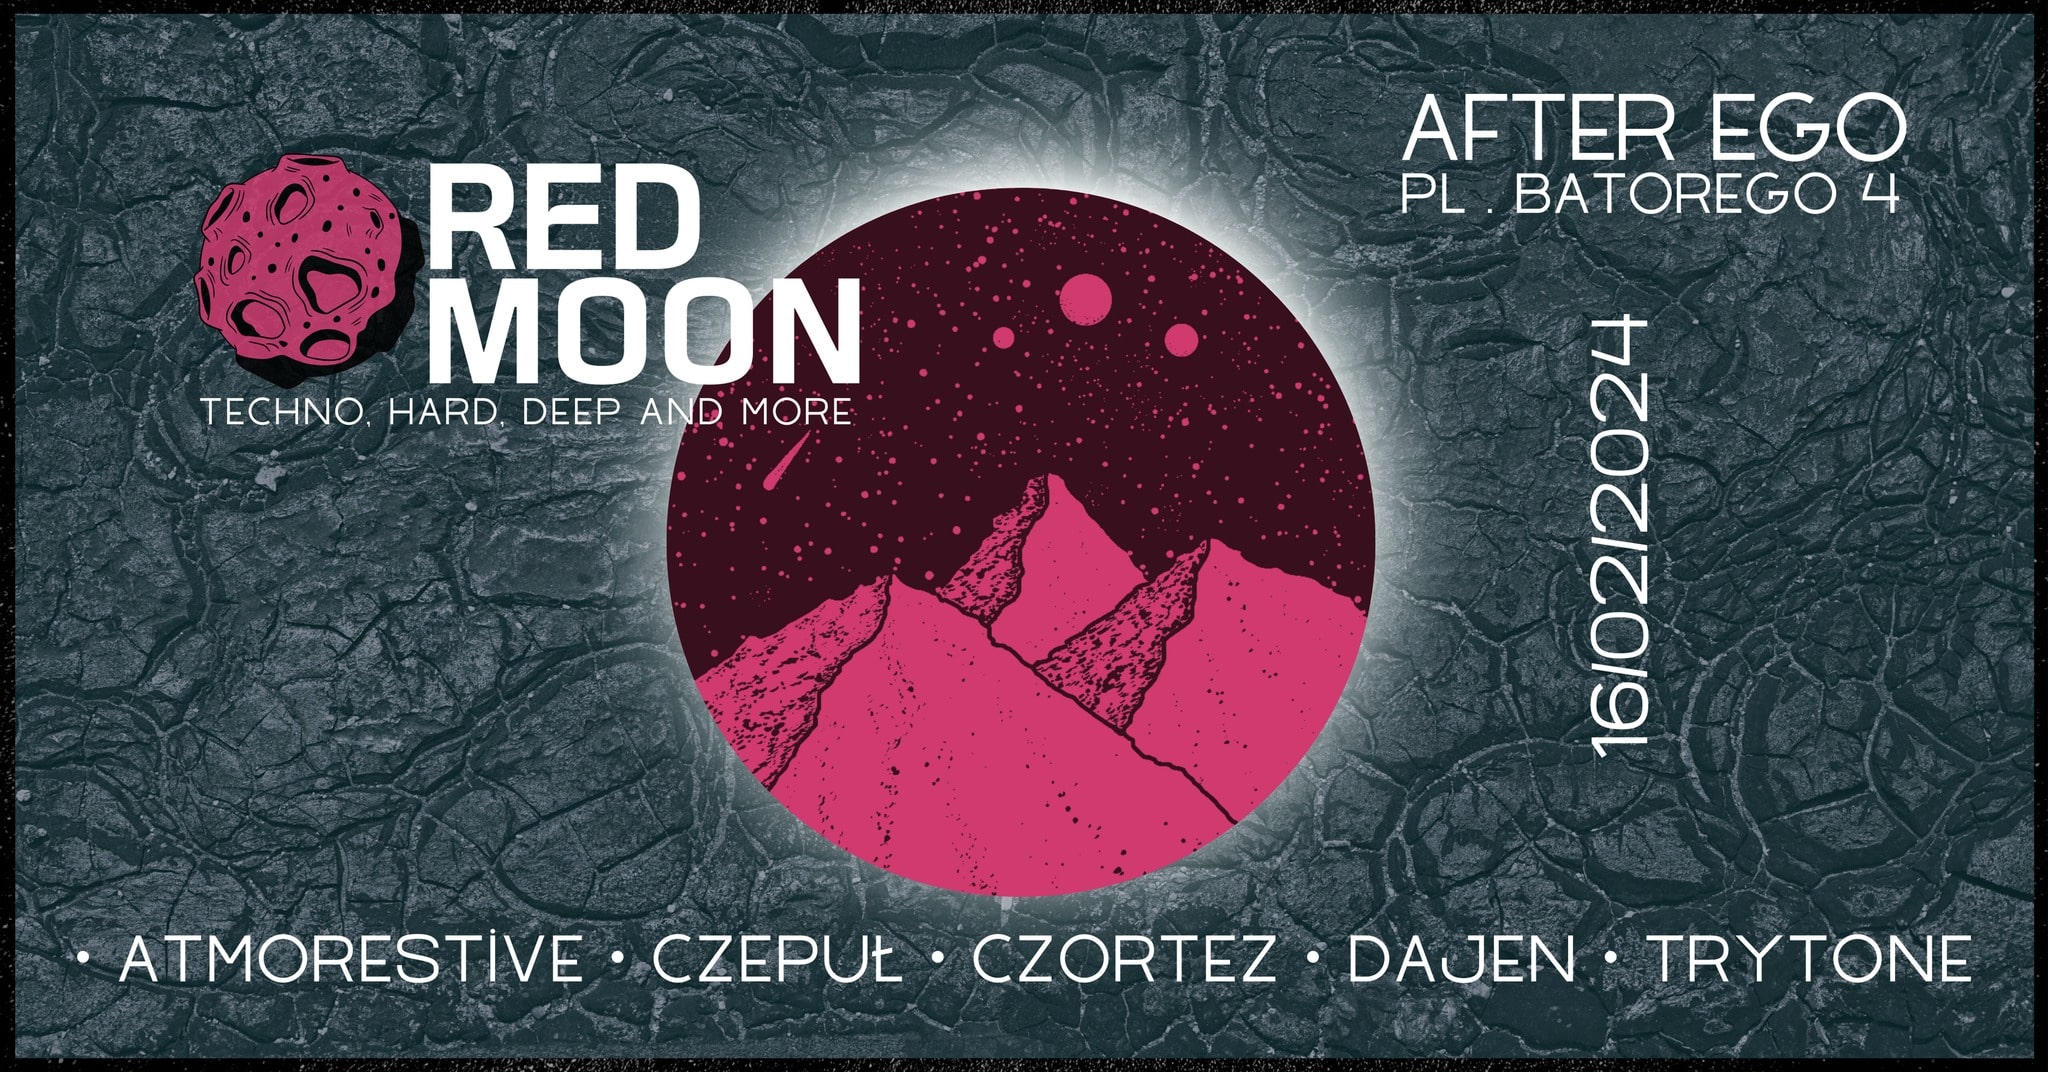 Red Moon #1 Techno, Hard, Deep and more .. | After Ego